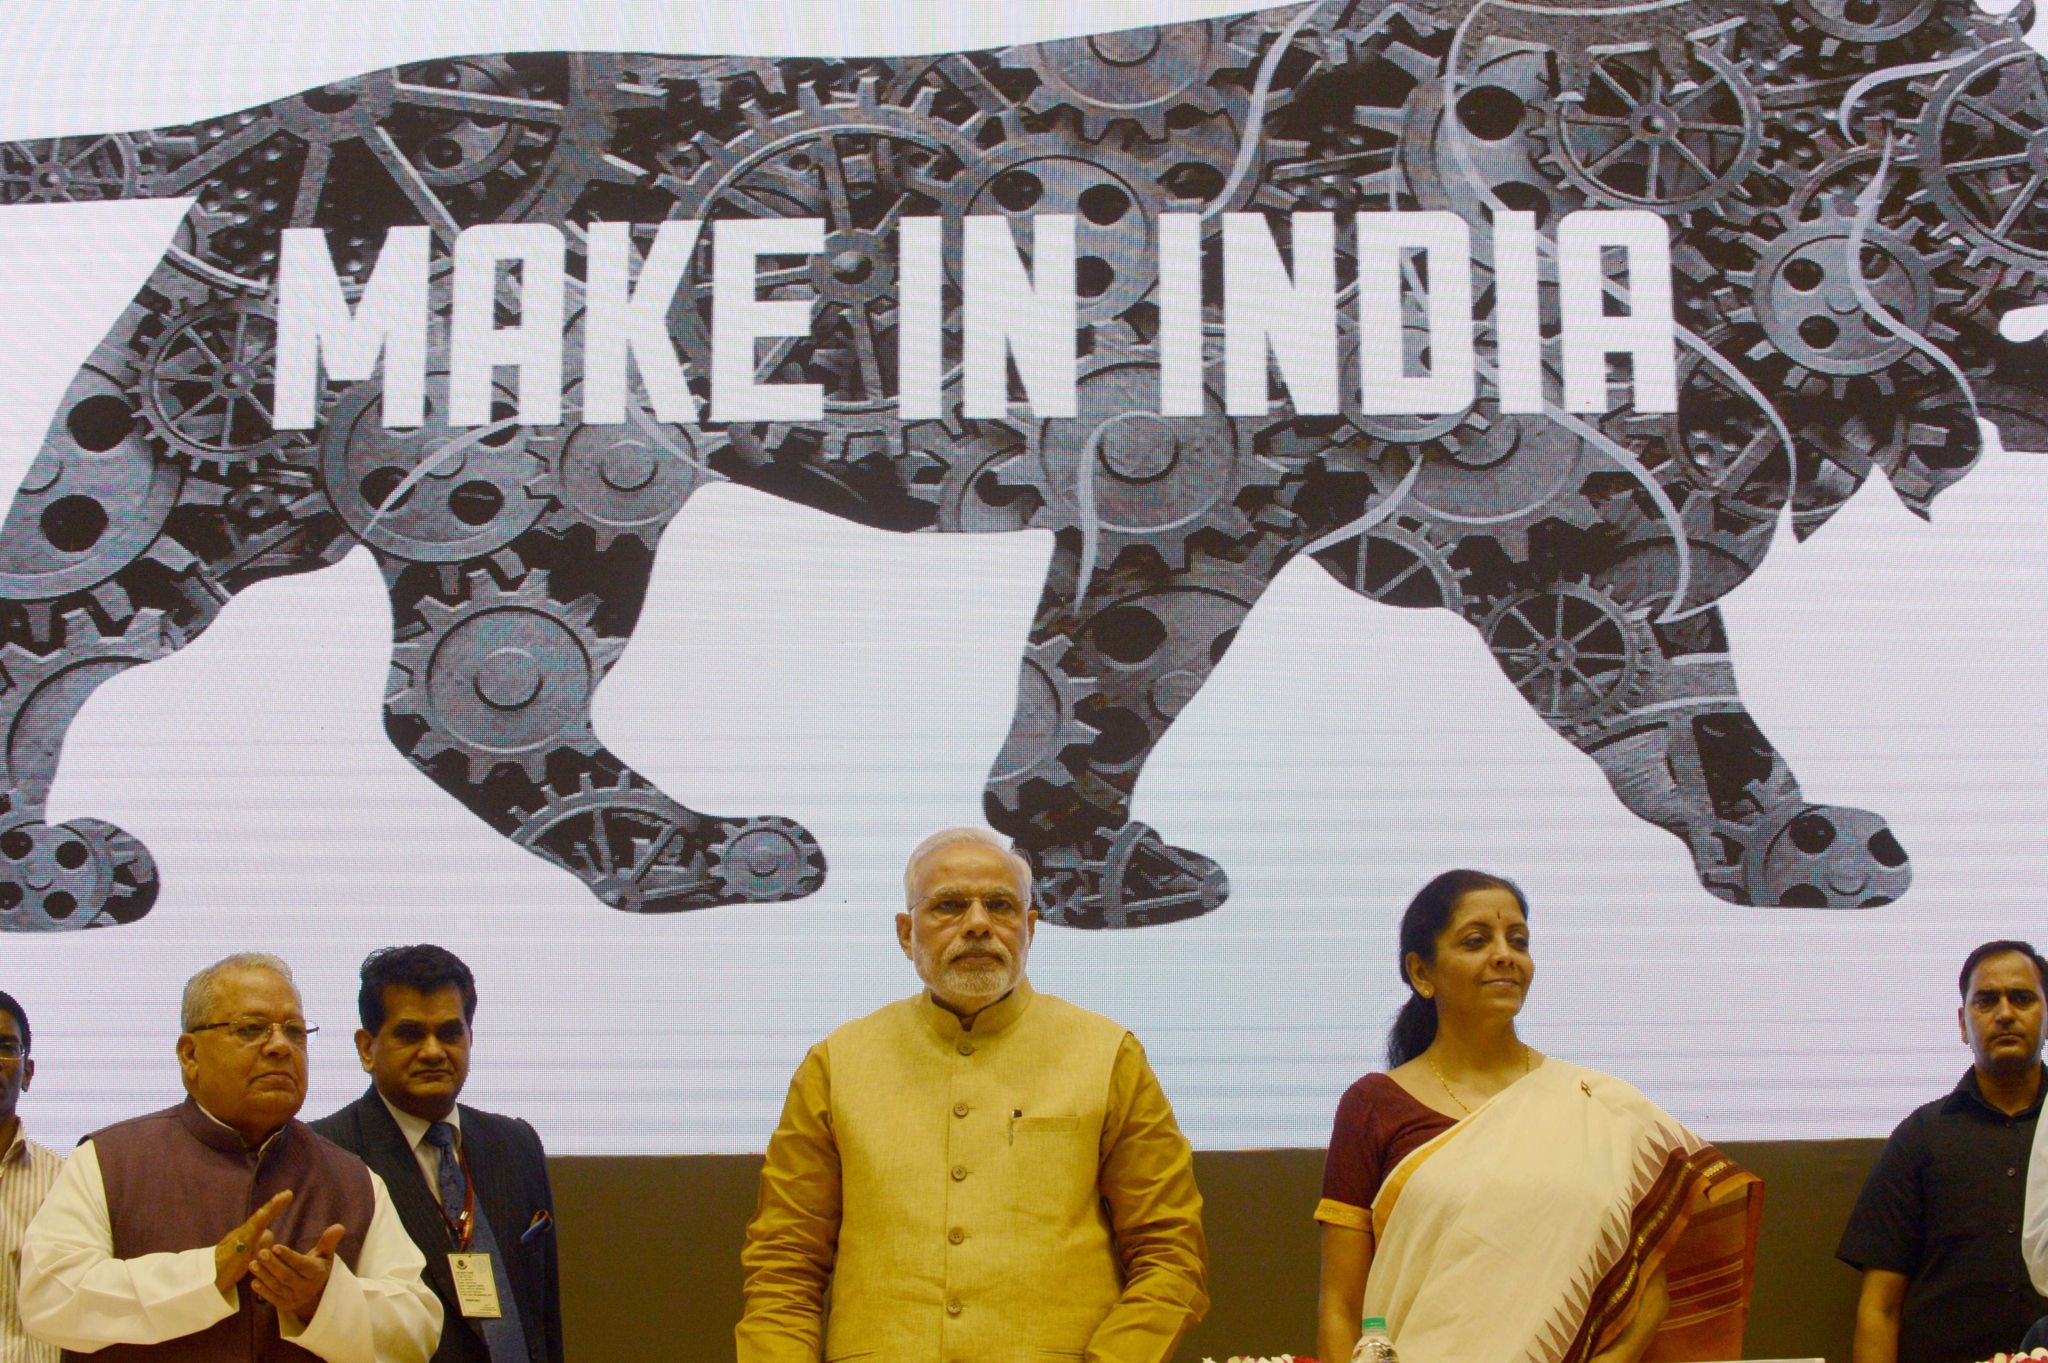 Indian Prime Minister Narendra Modi launches the 'Make In India' project.